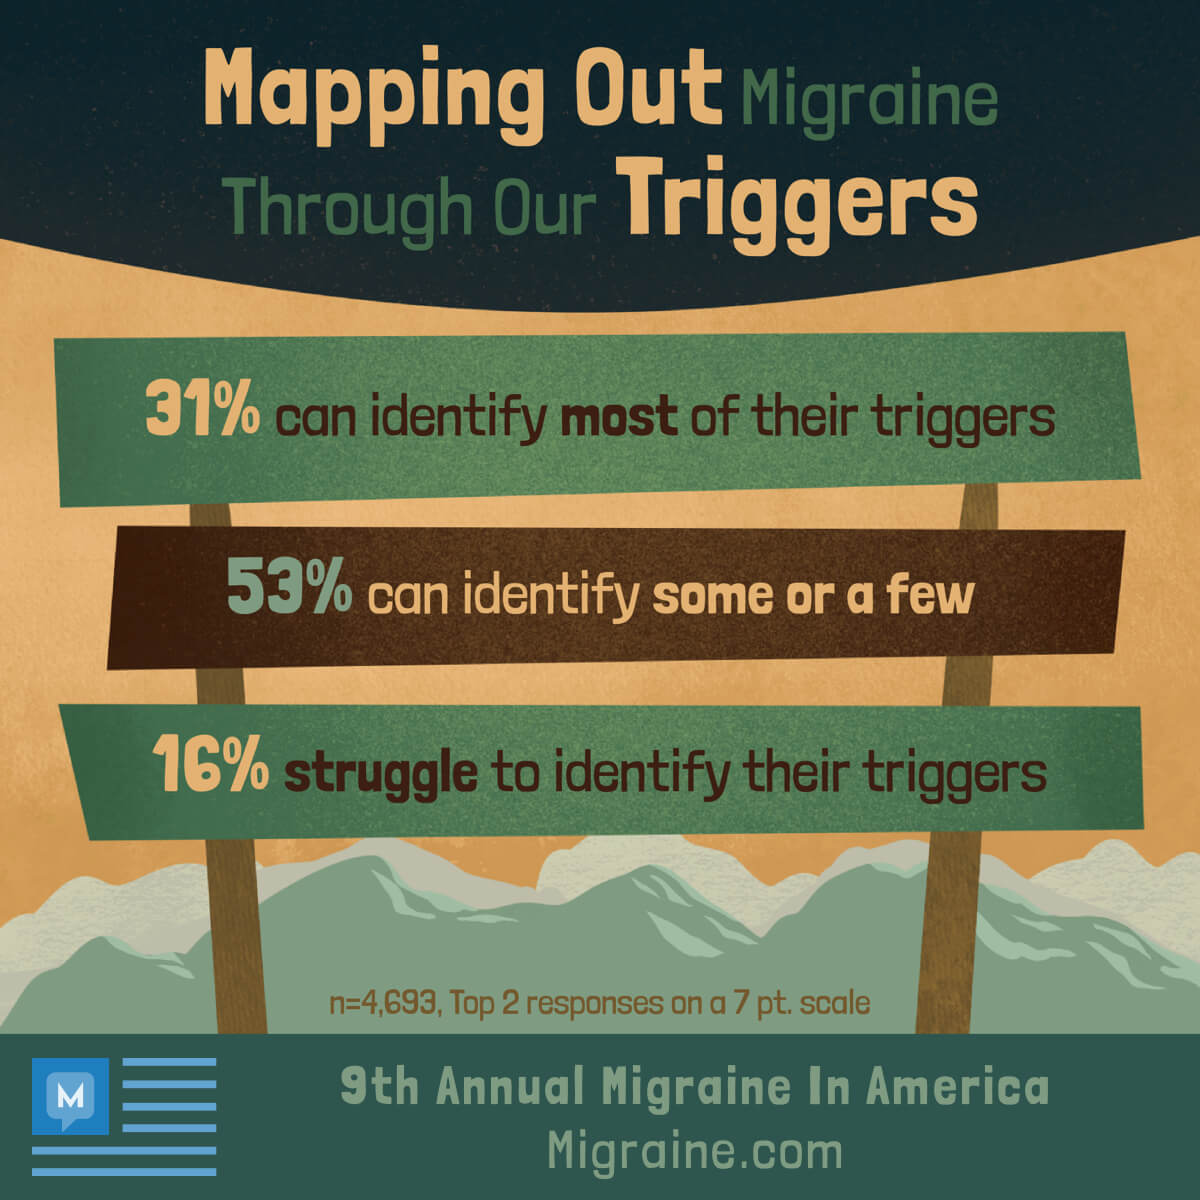 31% of Migraine In America survey respondents said that they can identify most of their triggers while 53% can identify some.